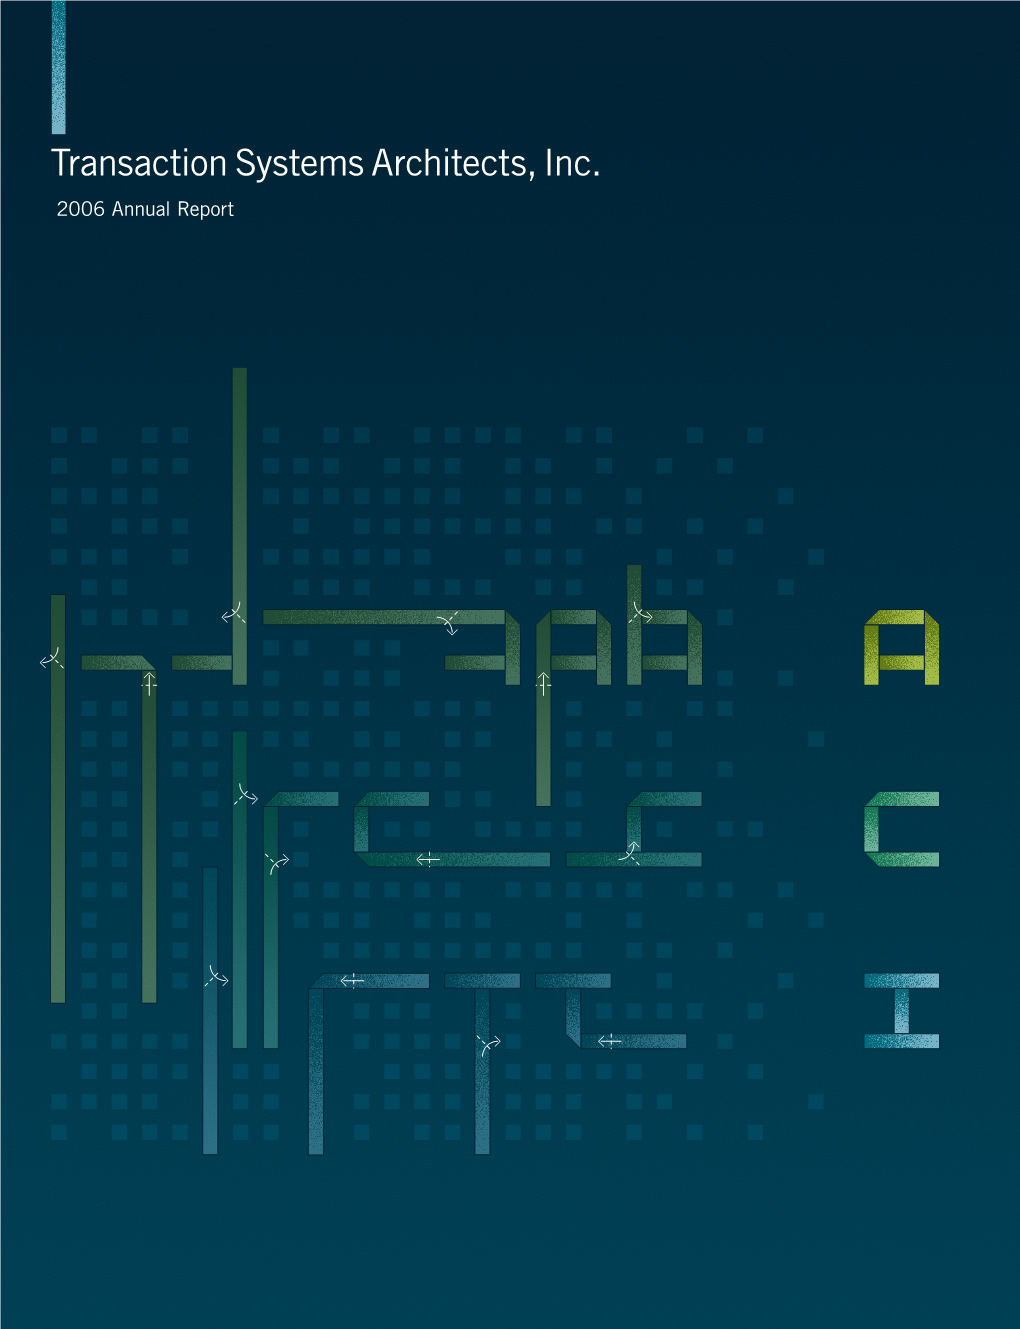 Transaction Systems Architects, Inc. 2006 Annual Report